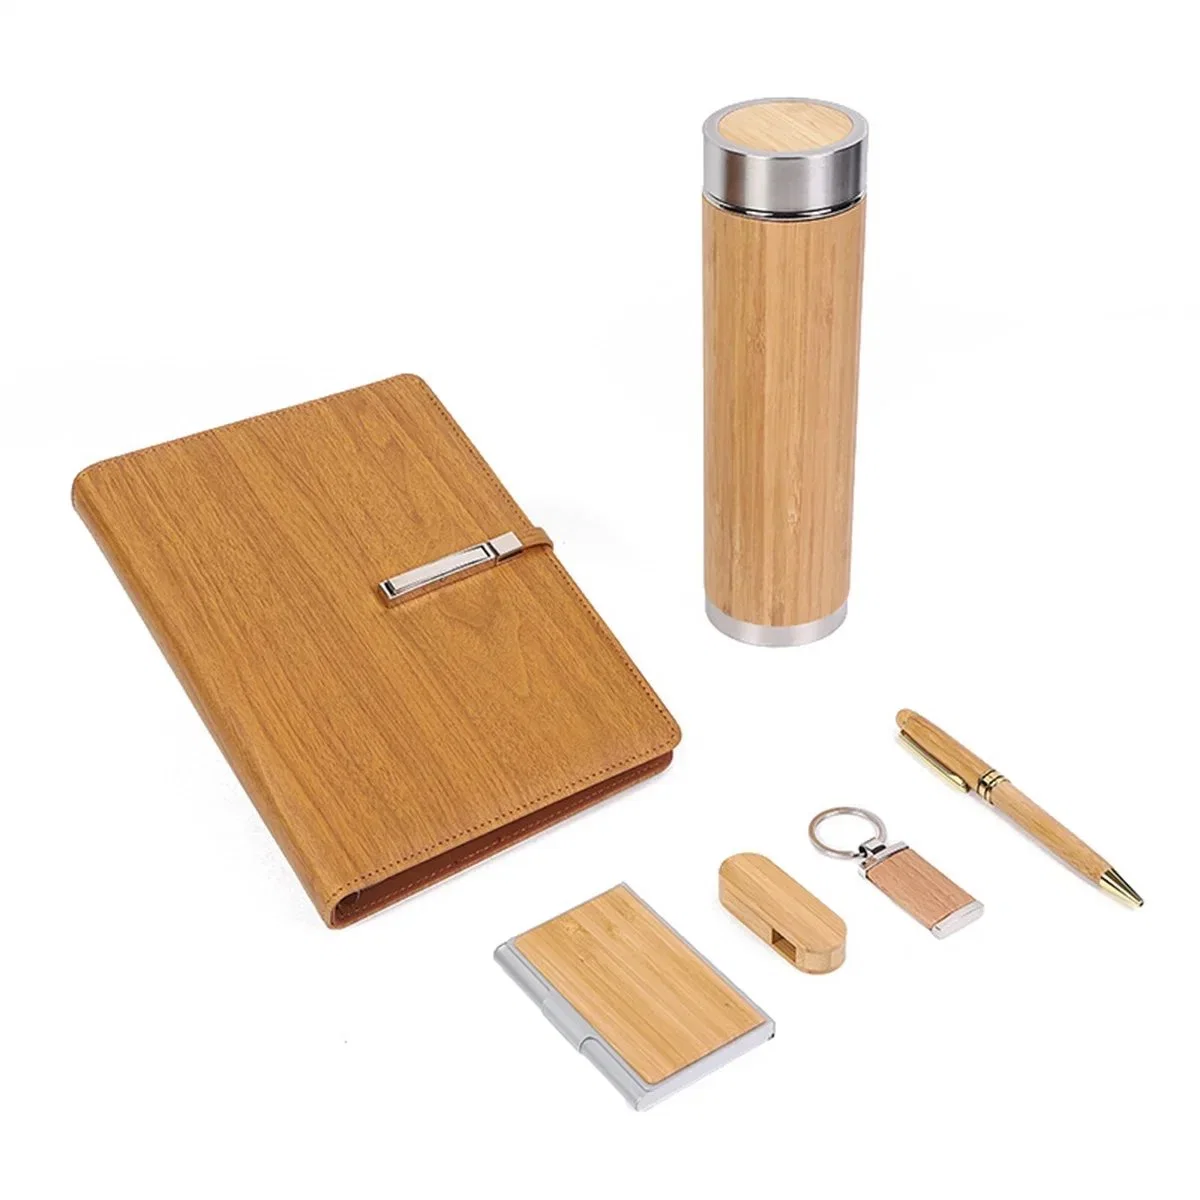 Bamboo Notebook Promotion Gift Bamboo Notebook Business Stationary Gift Set